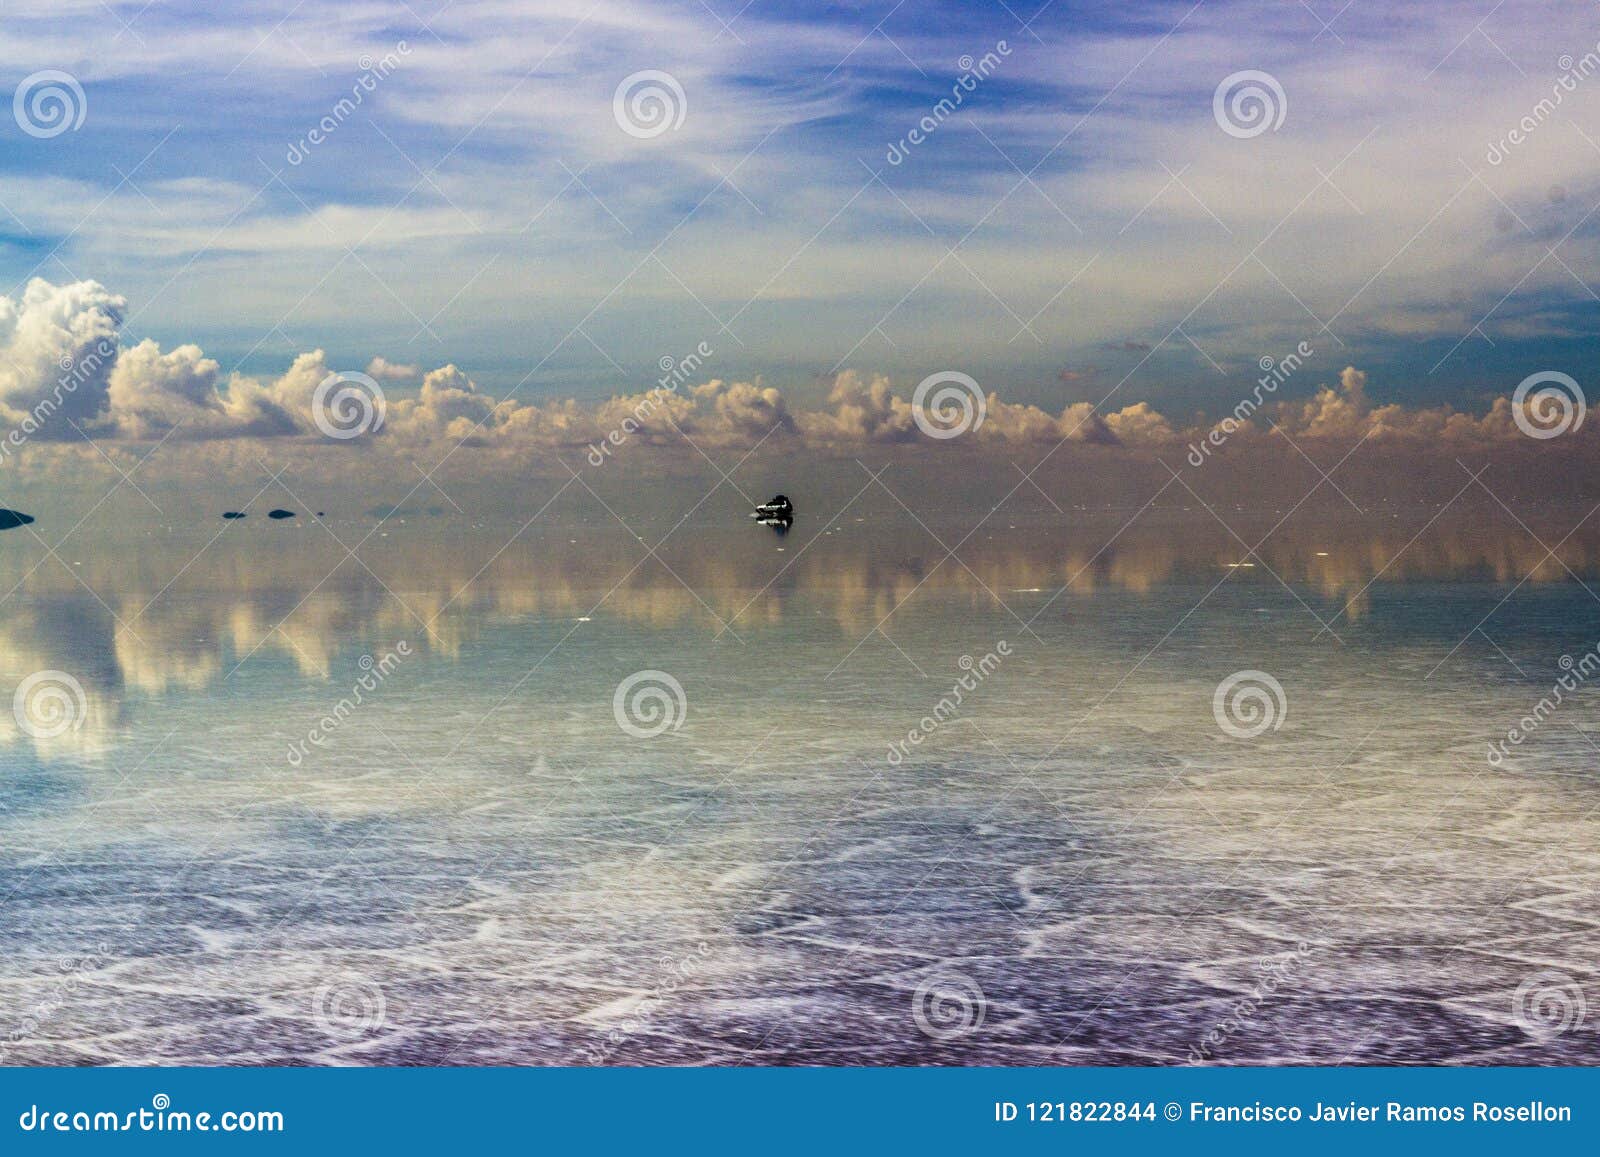 Traveling To Uyuni Salt Flats Along The Bolivian Altiplano An Amazing Journey From Chile To Bolivia An Awesome Awd Stock Photo Image Of Lake Holidays 121822844